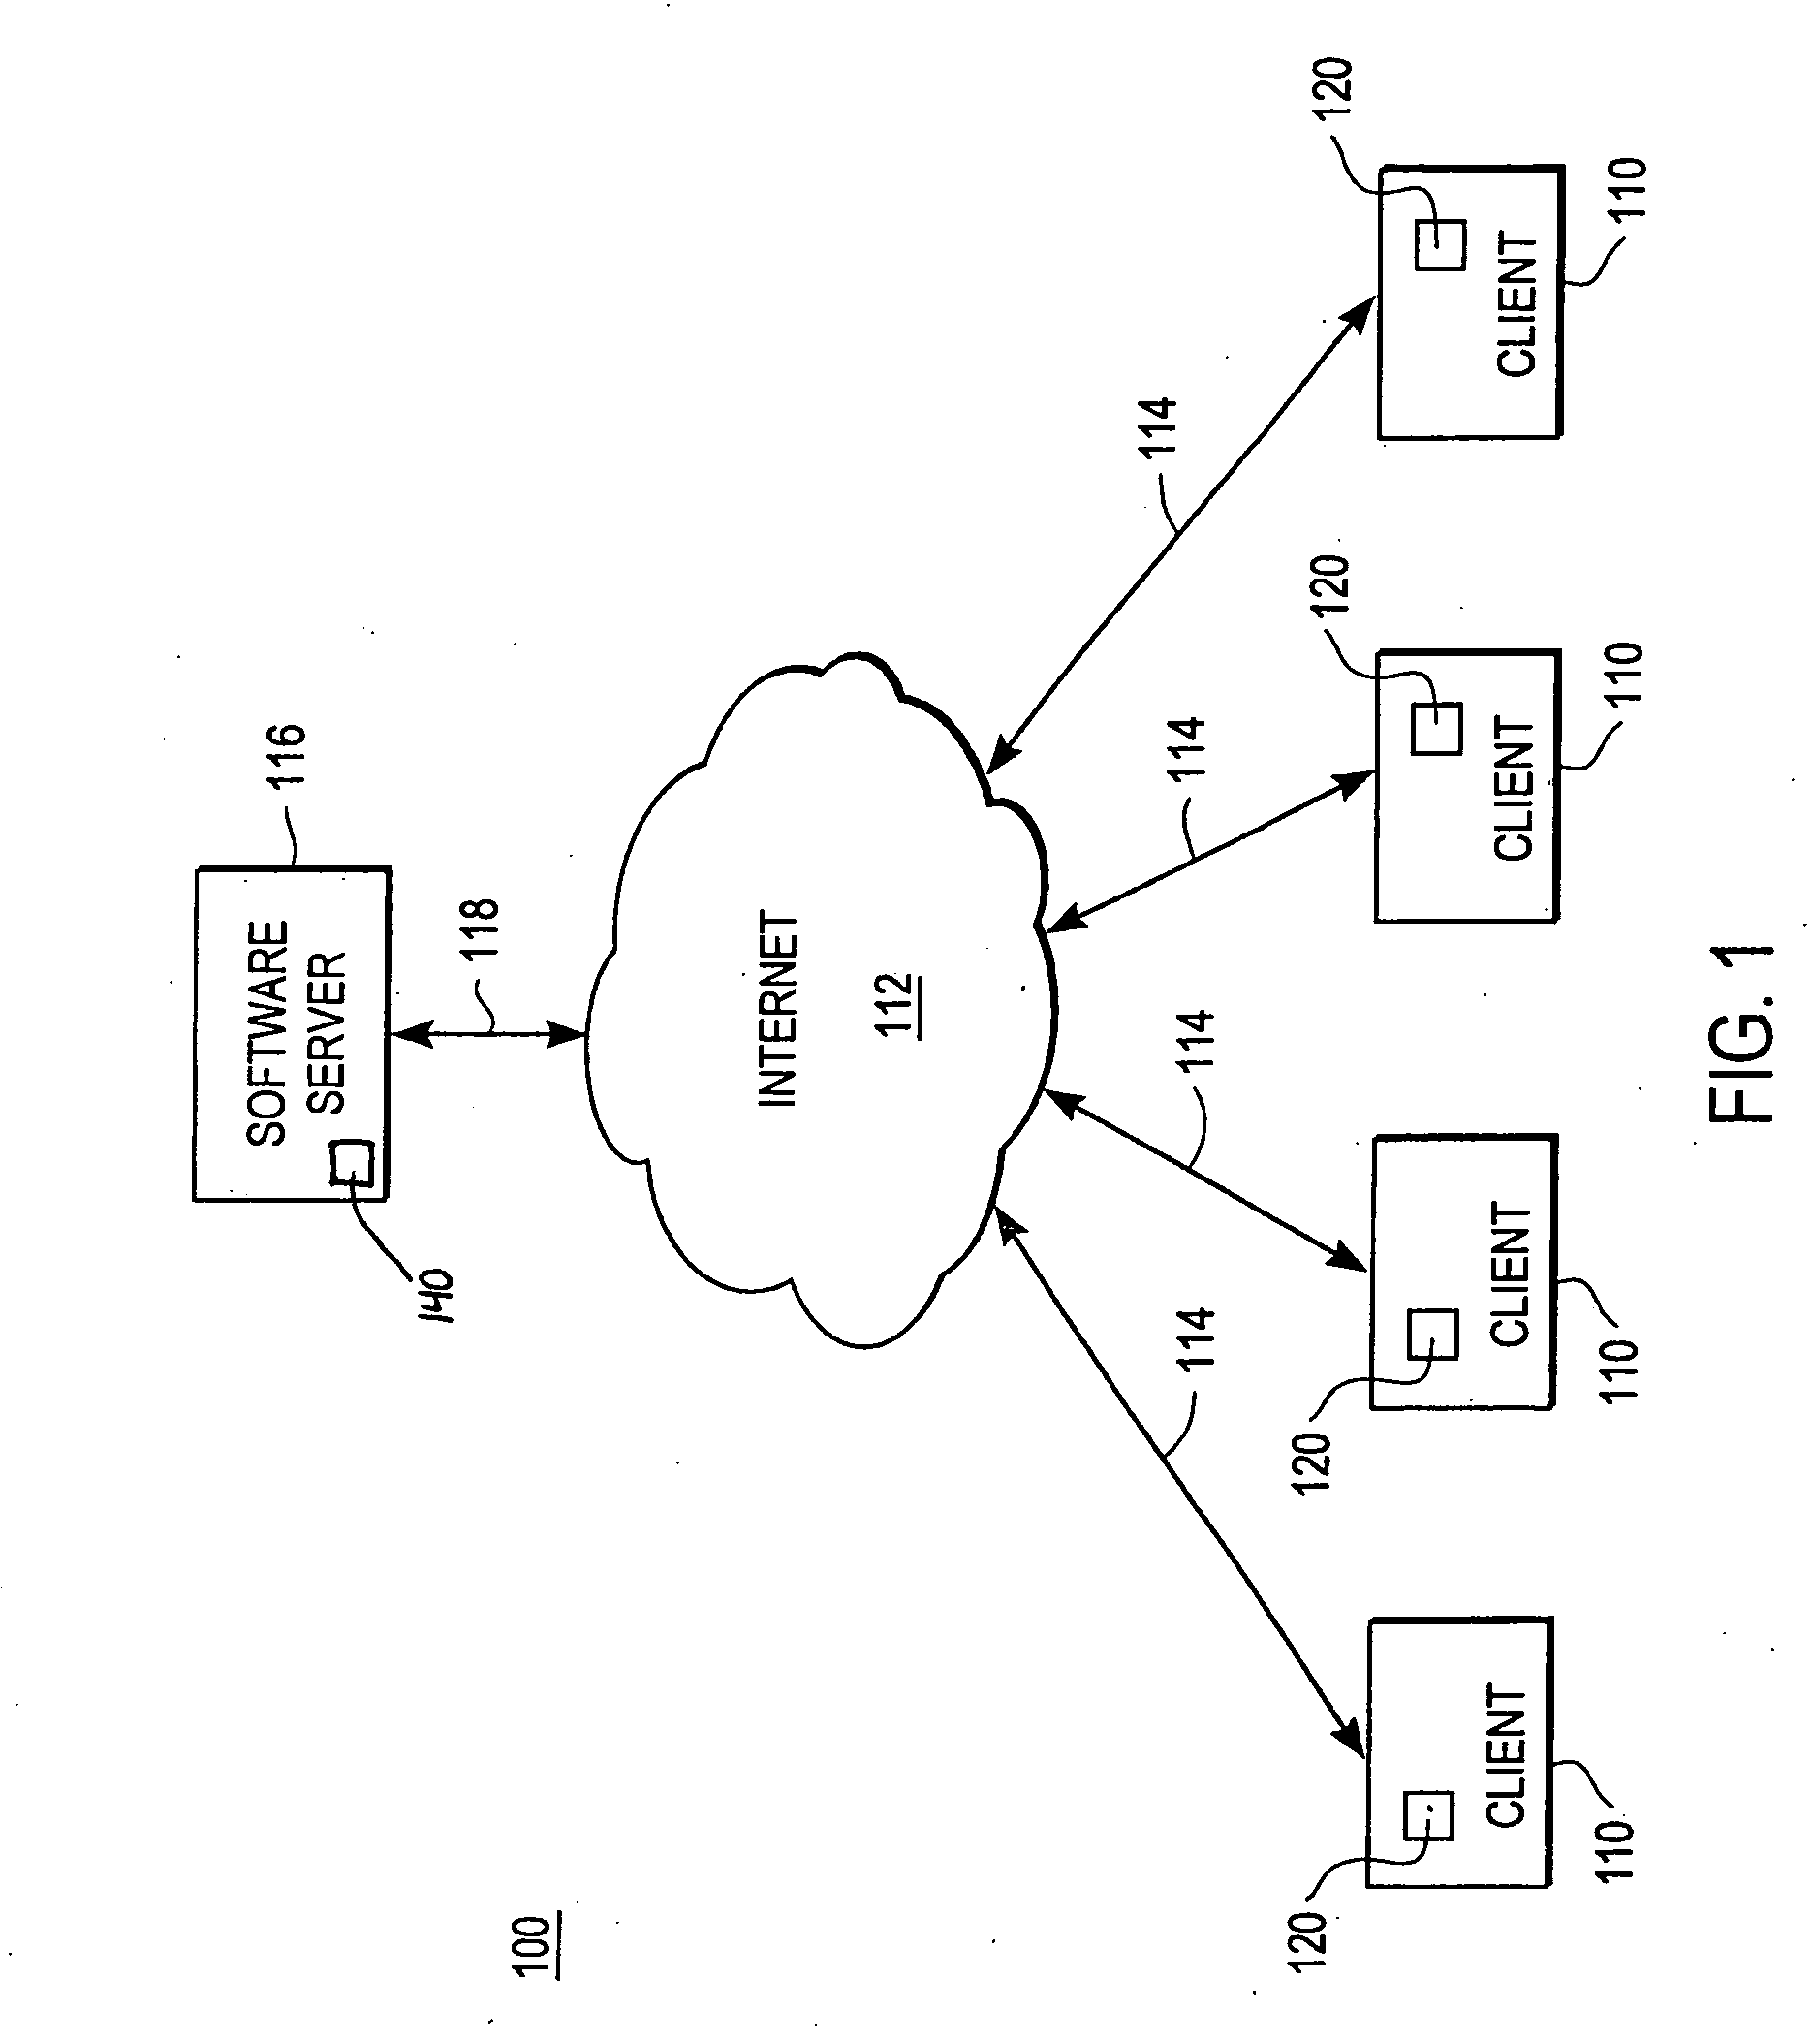 Associating licensing information with software applications